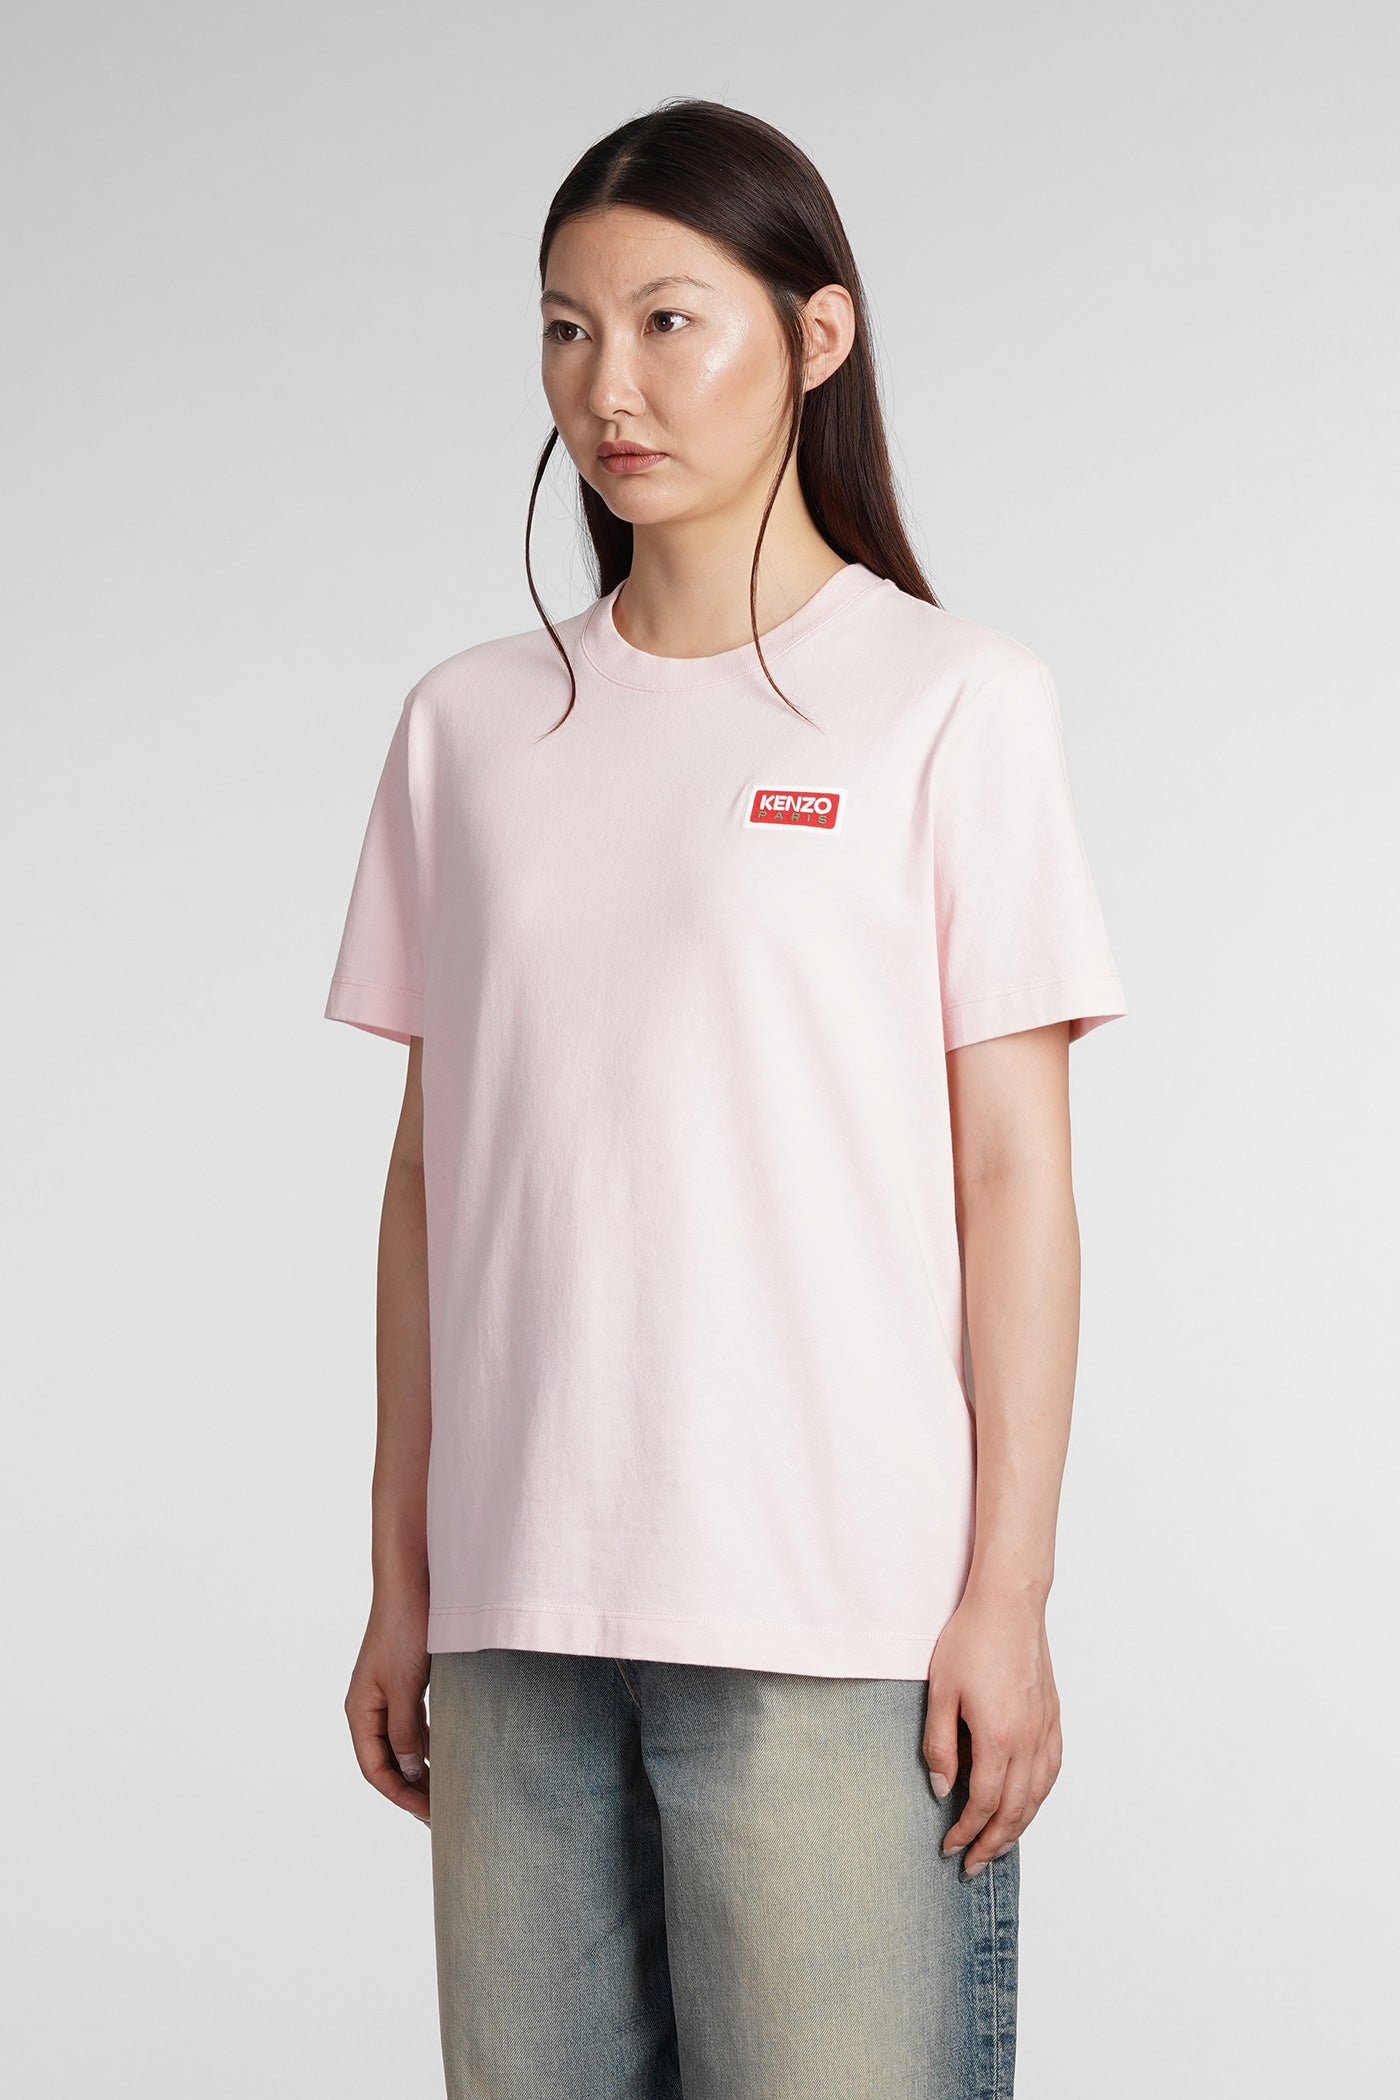 T-Shirt in rose-pink cotton